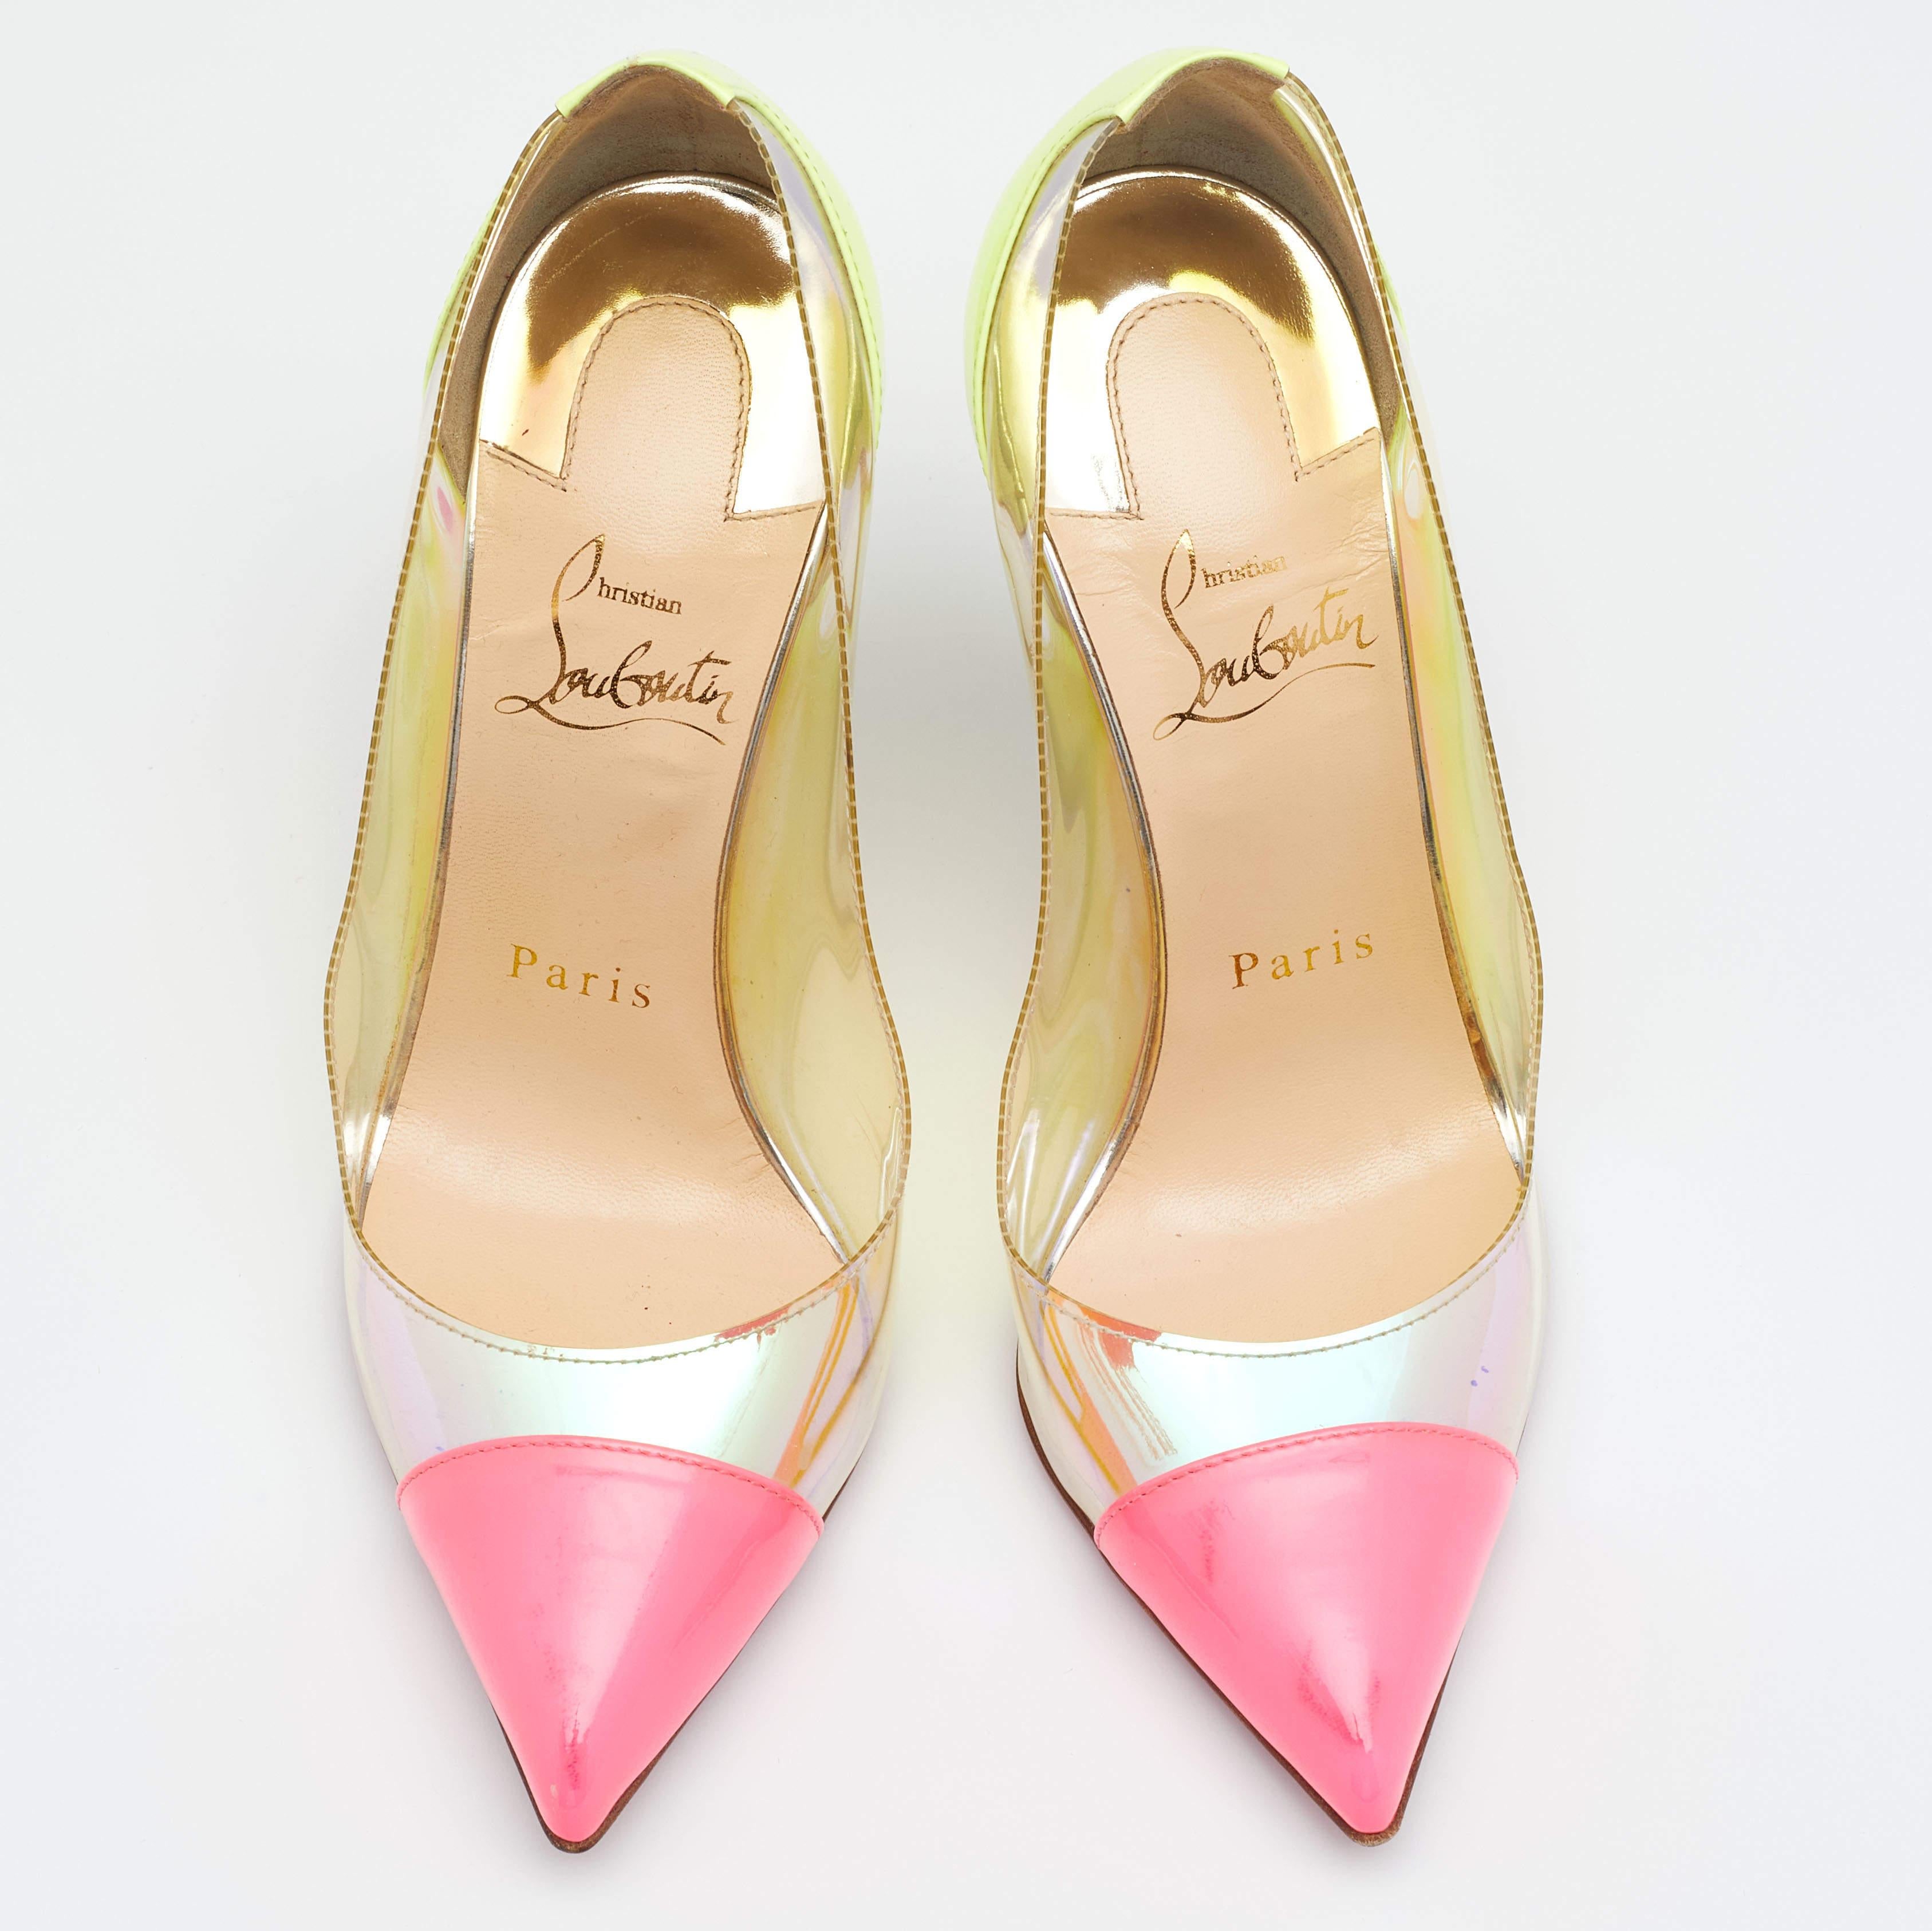 Take every step with elegance and style in these pumps from the House of Christian Louboutin. They are crafted meticulously using multicolored PVC and patent leather. They showcase pointed toes, a slip-on style, and slim heels. These beautiful CL